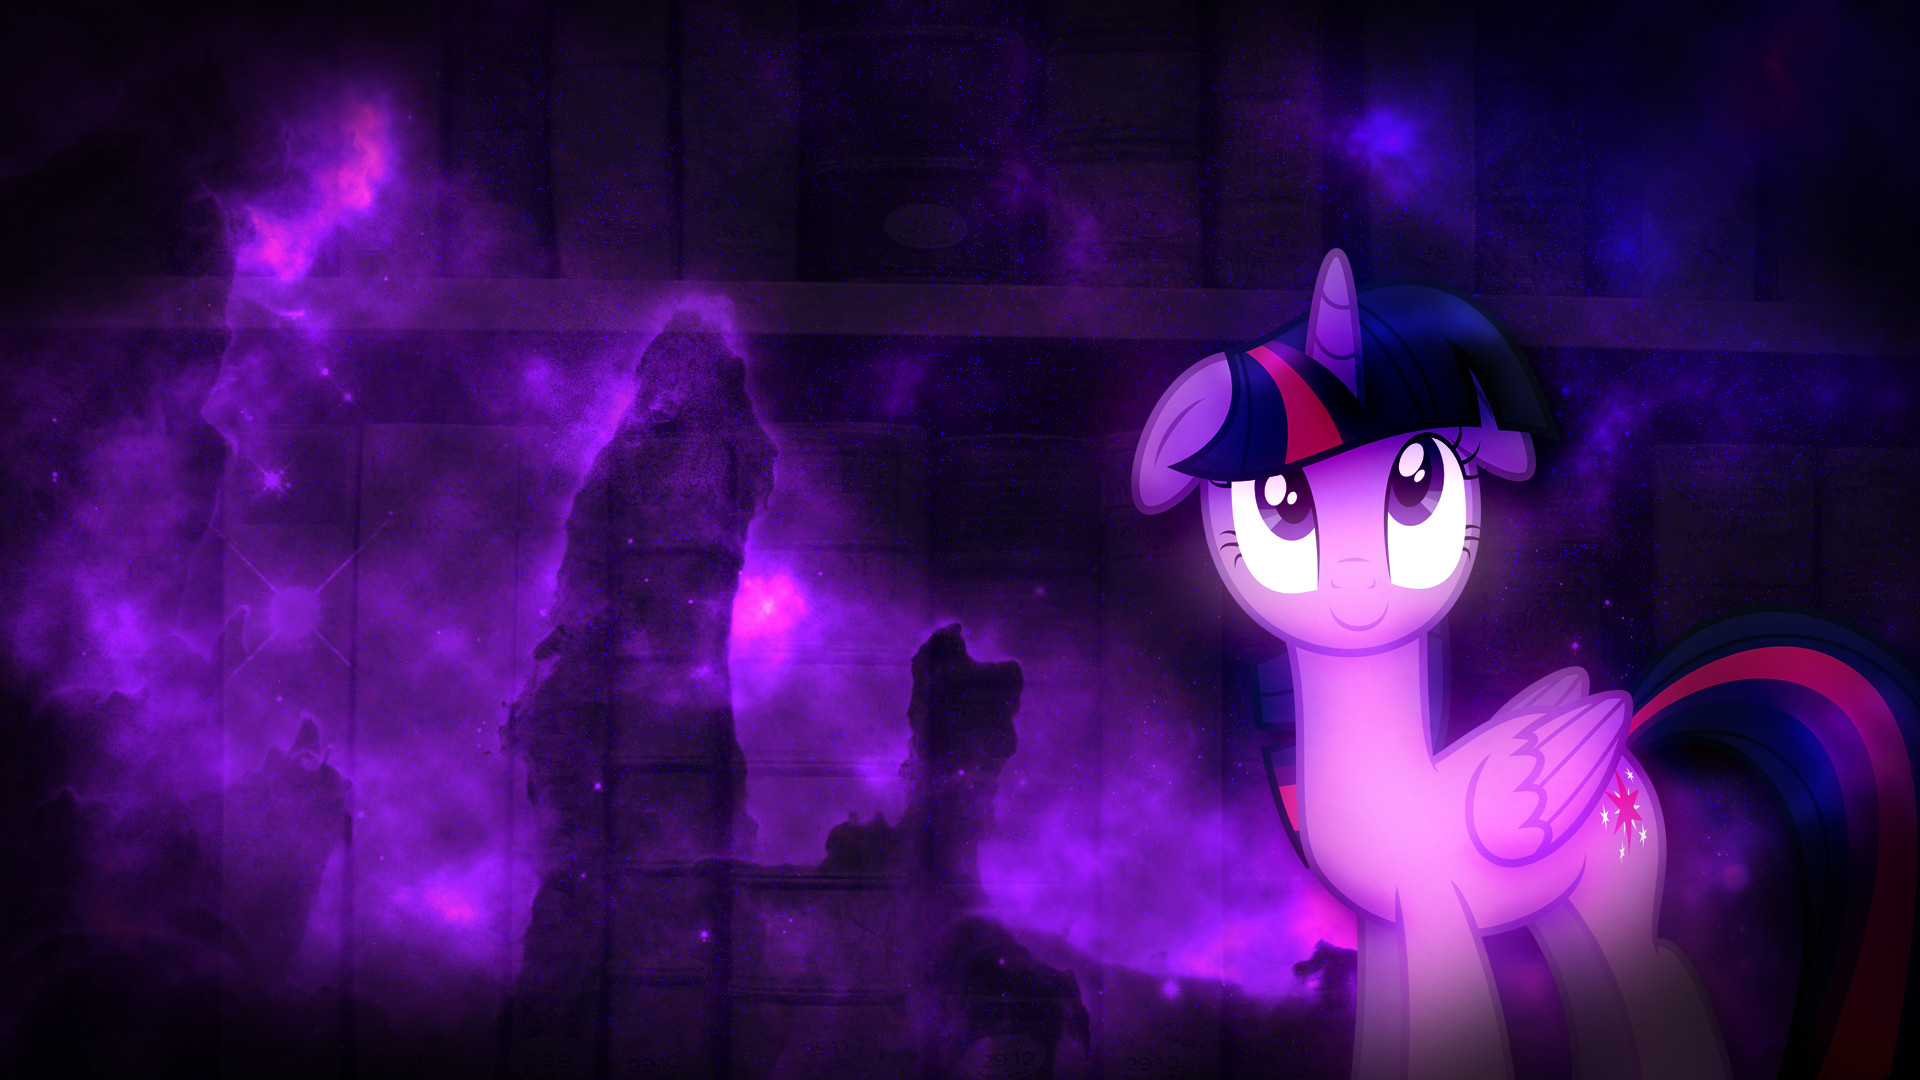 1920x1080 ... FiM: Twilight Sparkle Wallpaper (Requested) by M24Designs